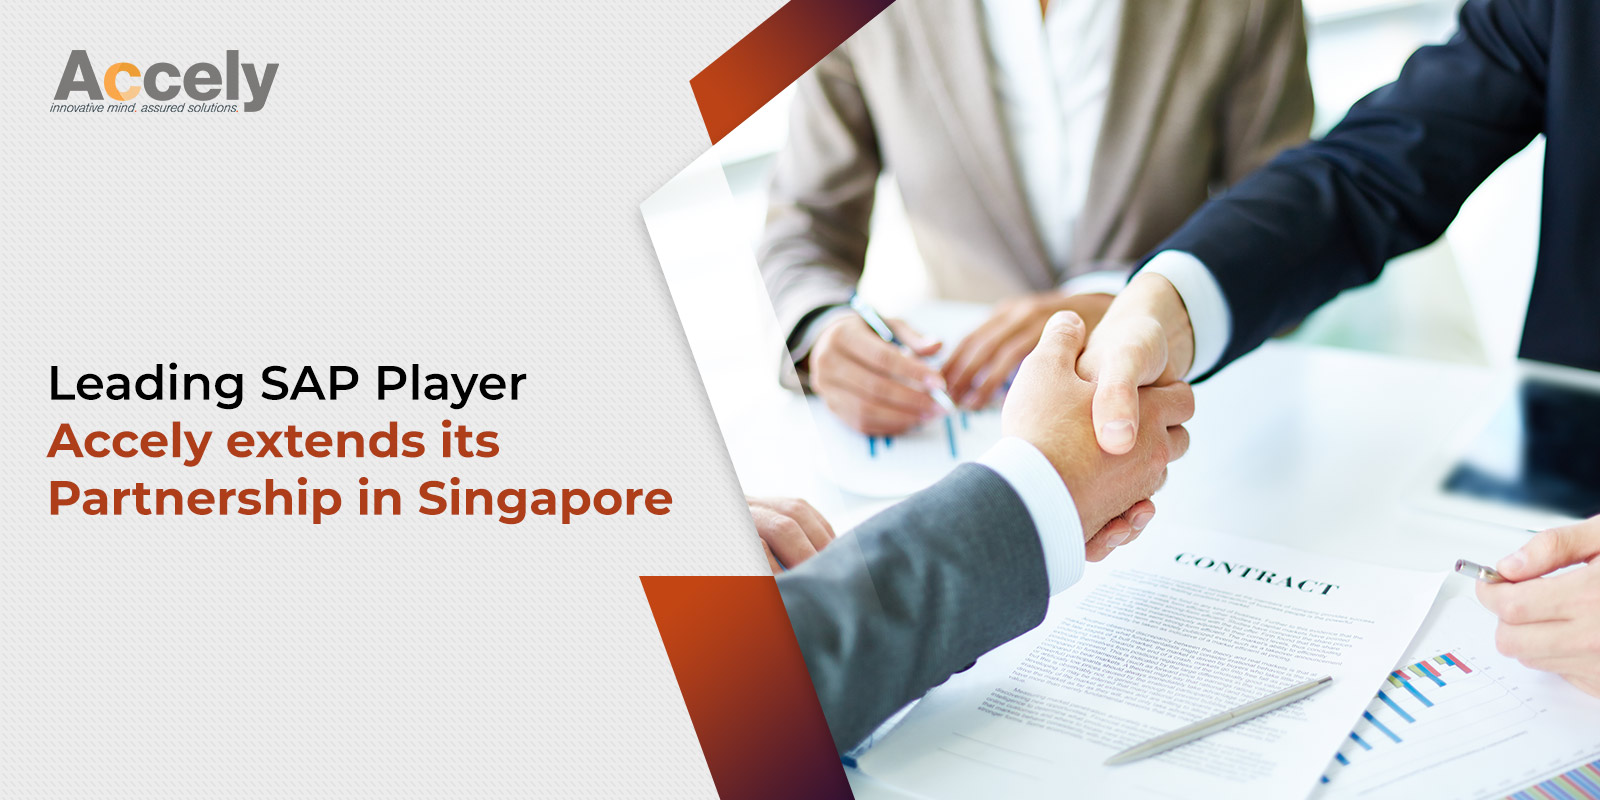 Leading SAP Player Accely extends its Partnership in Singapore